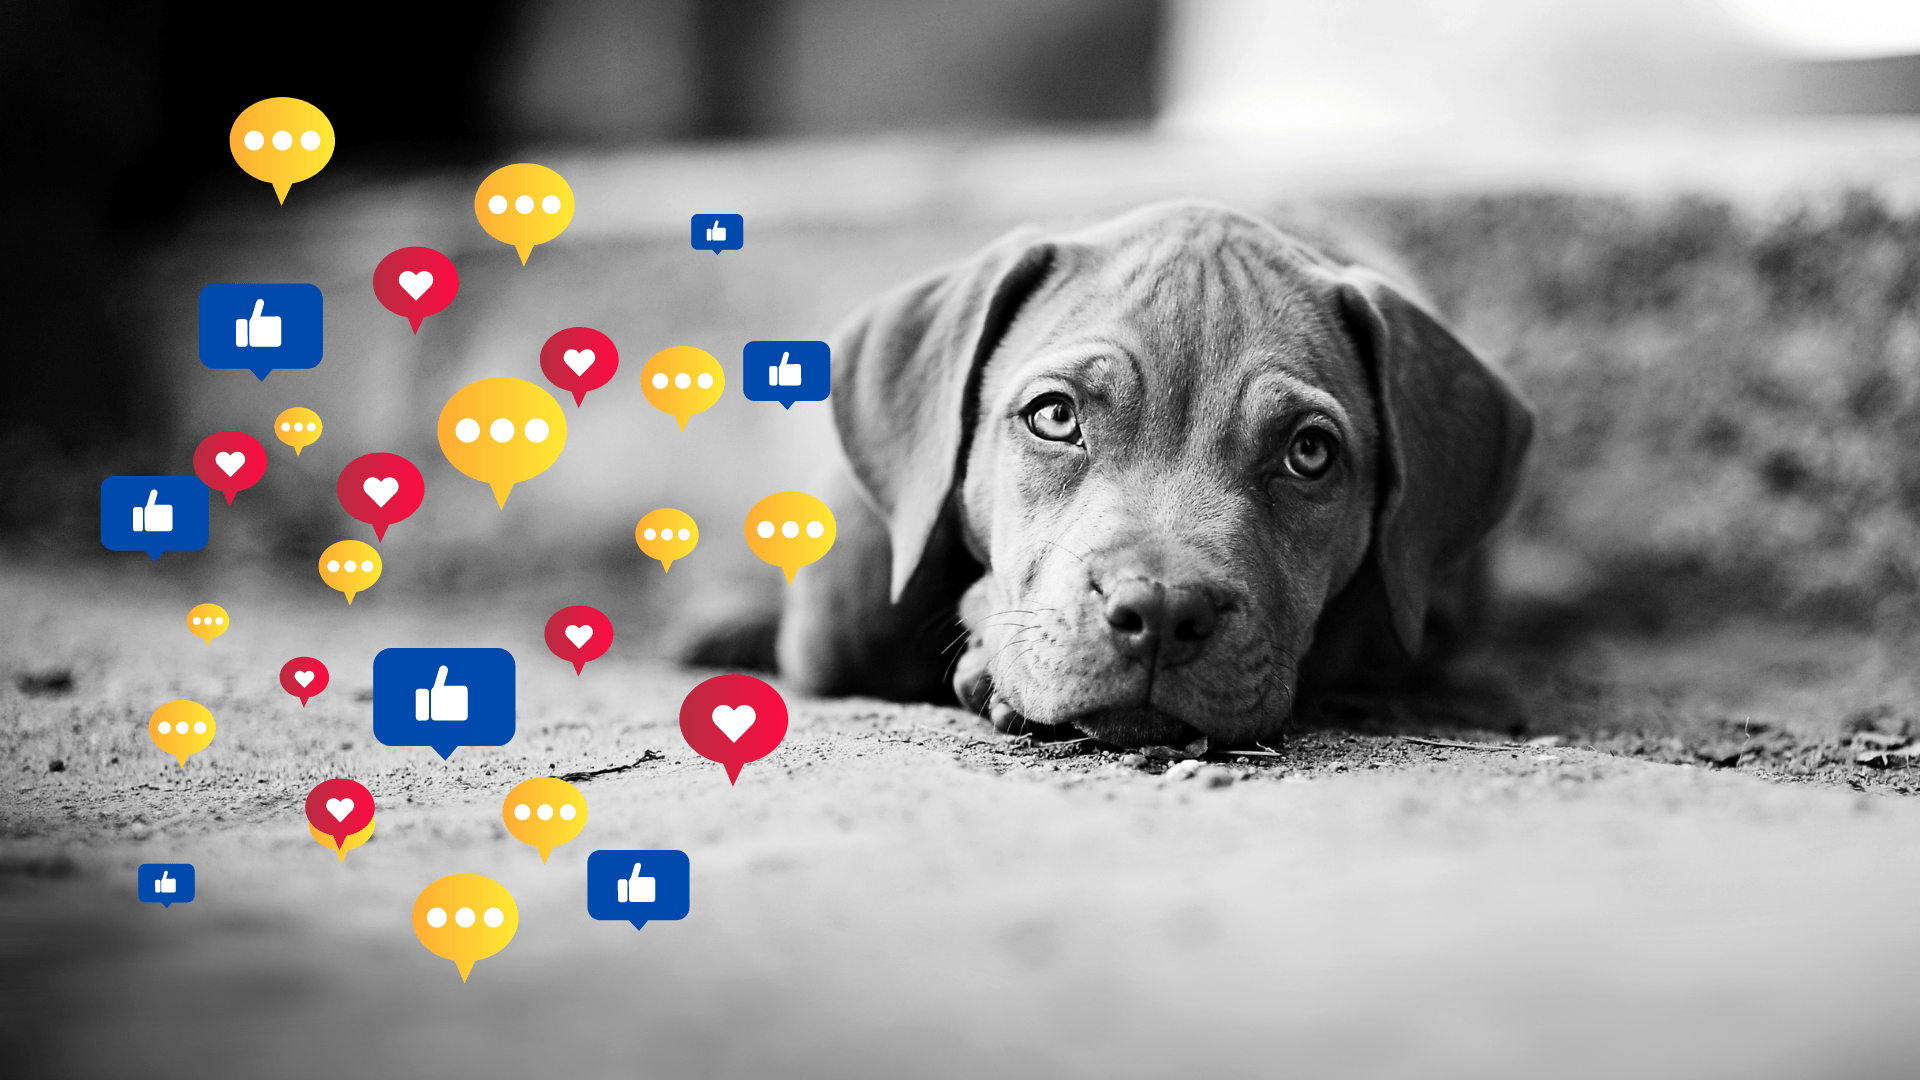 The importance of breeder professionalism with customers on social media